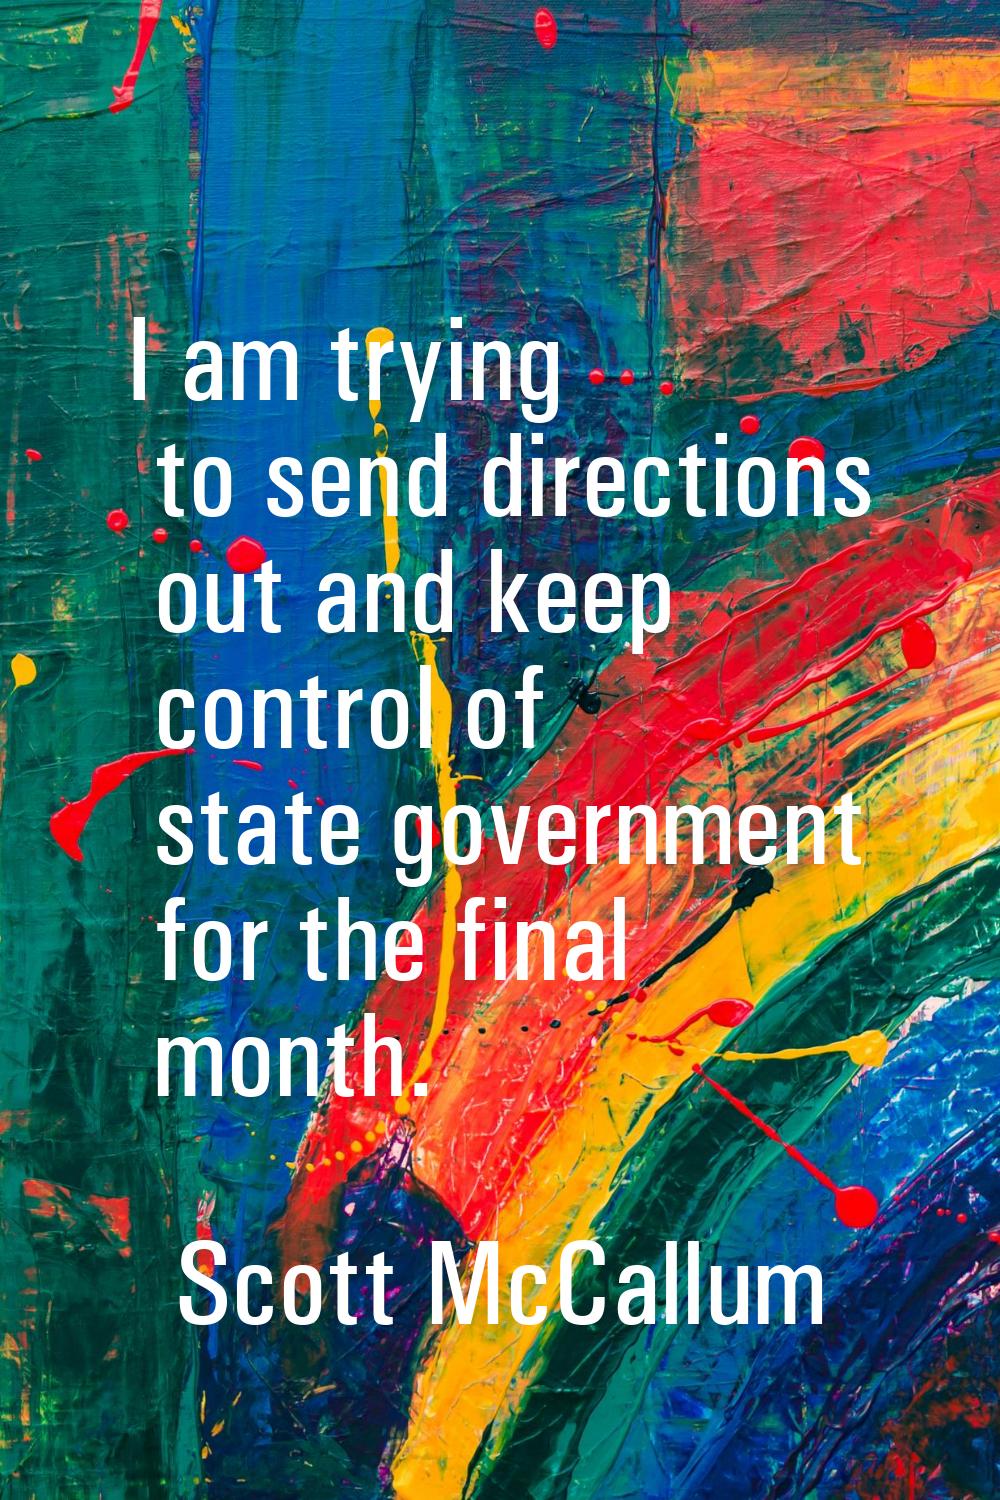 I am trying to send directions out and keep control of state government for the final month.